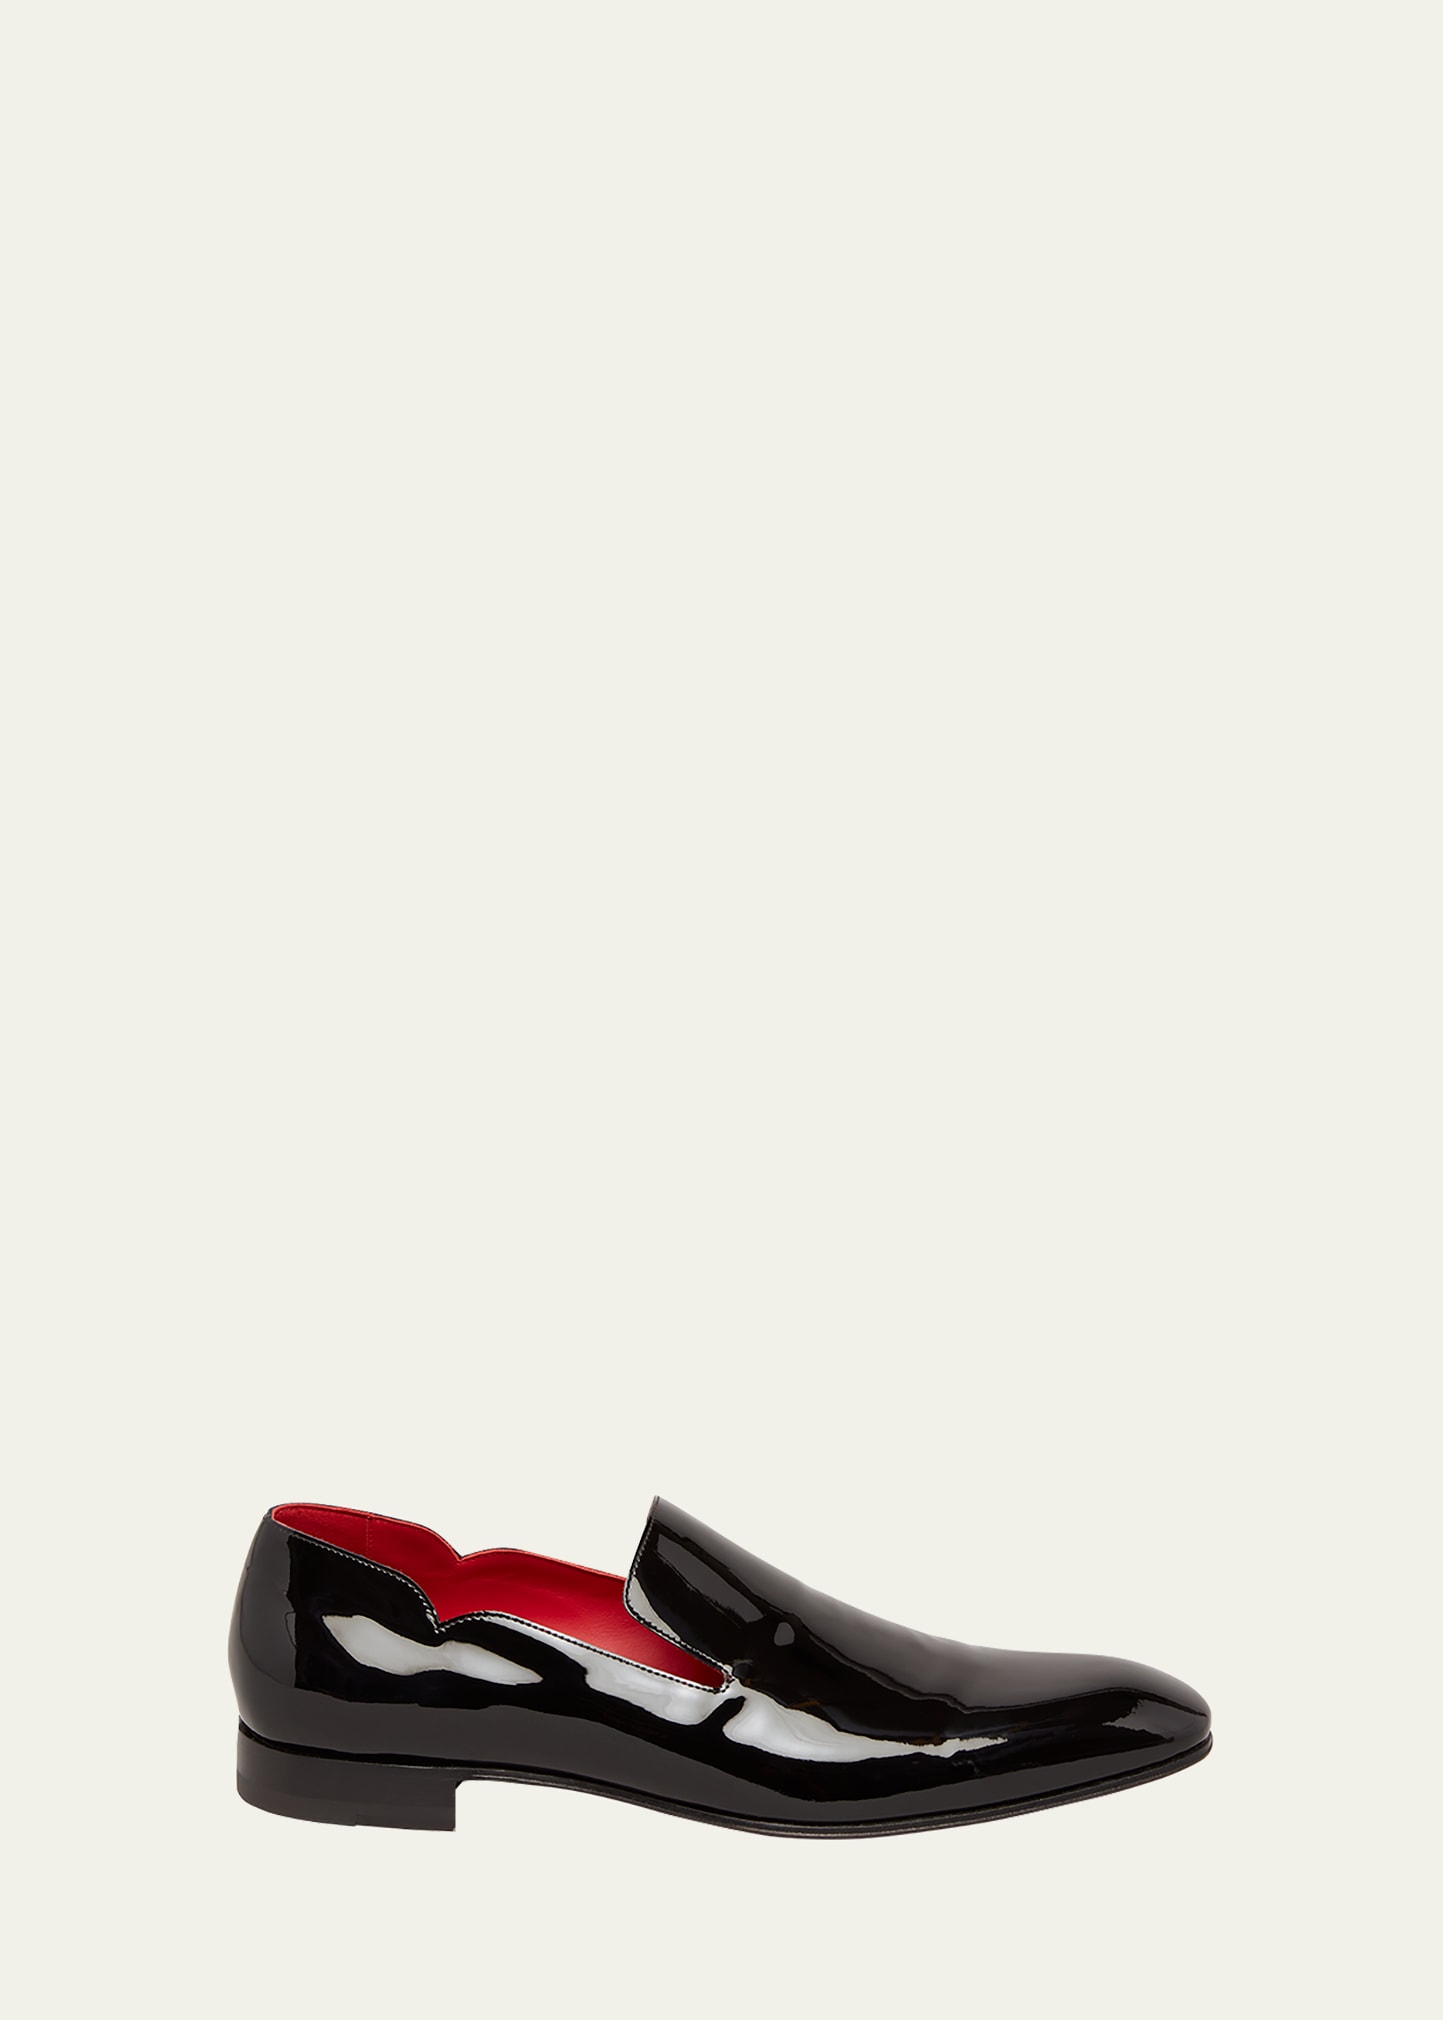 Christian Louboutin Men's Dandy Chick Flat Patent Leather Loafers